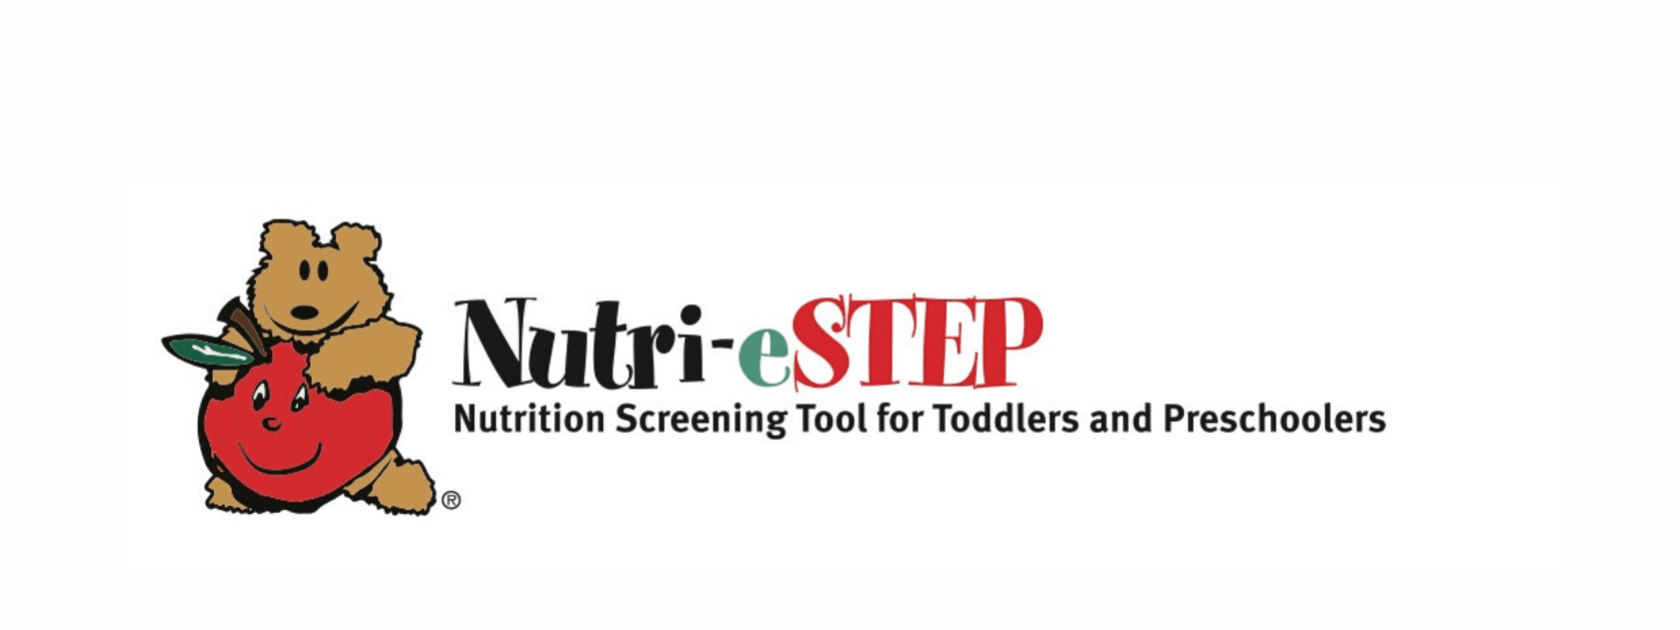 Nutri-eSTEP Nutrition Screening Tool for Toddlers and Preschoolers